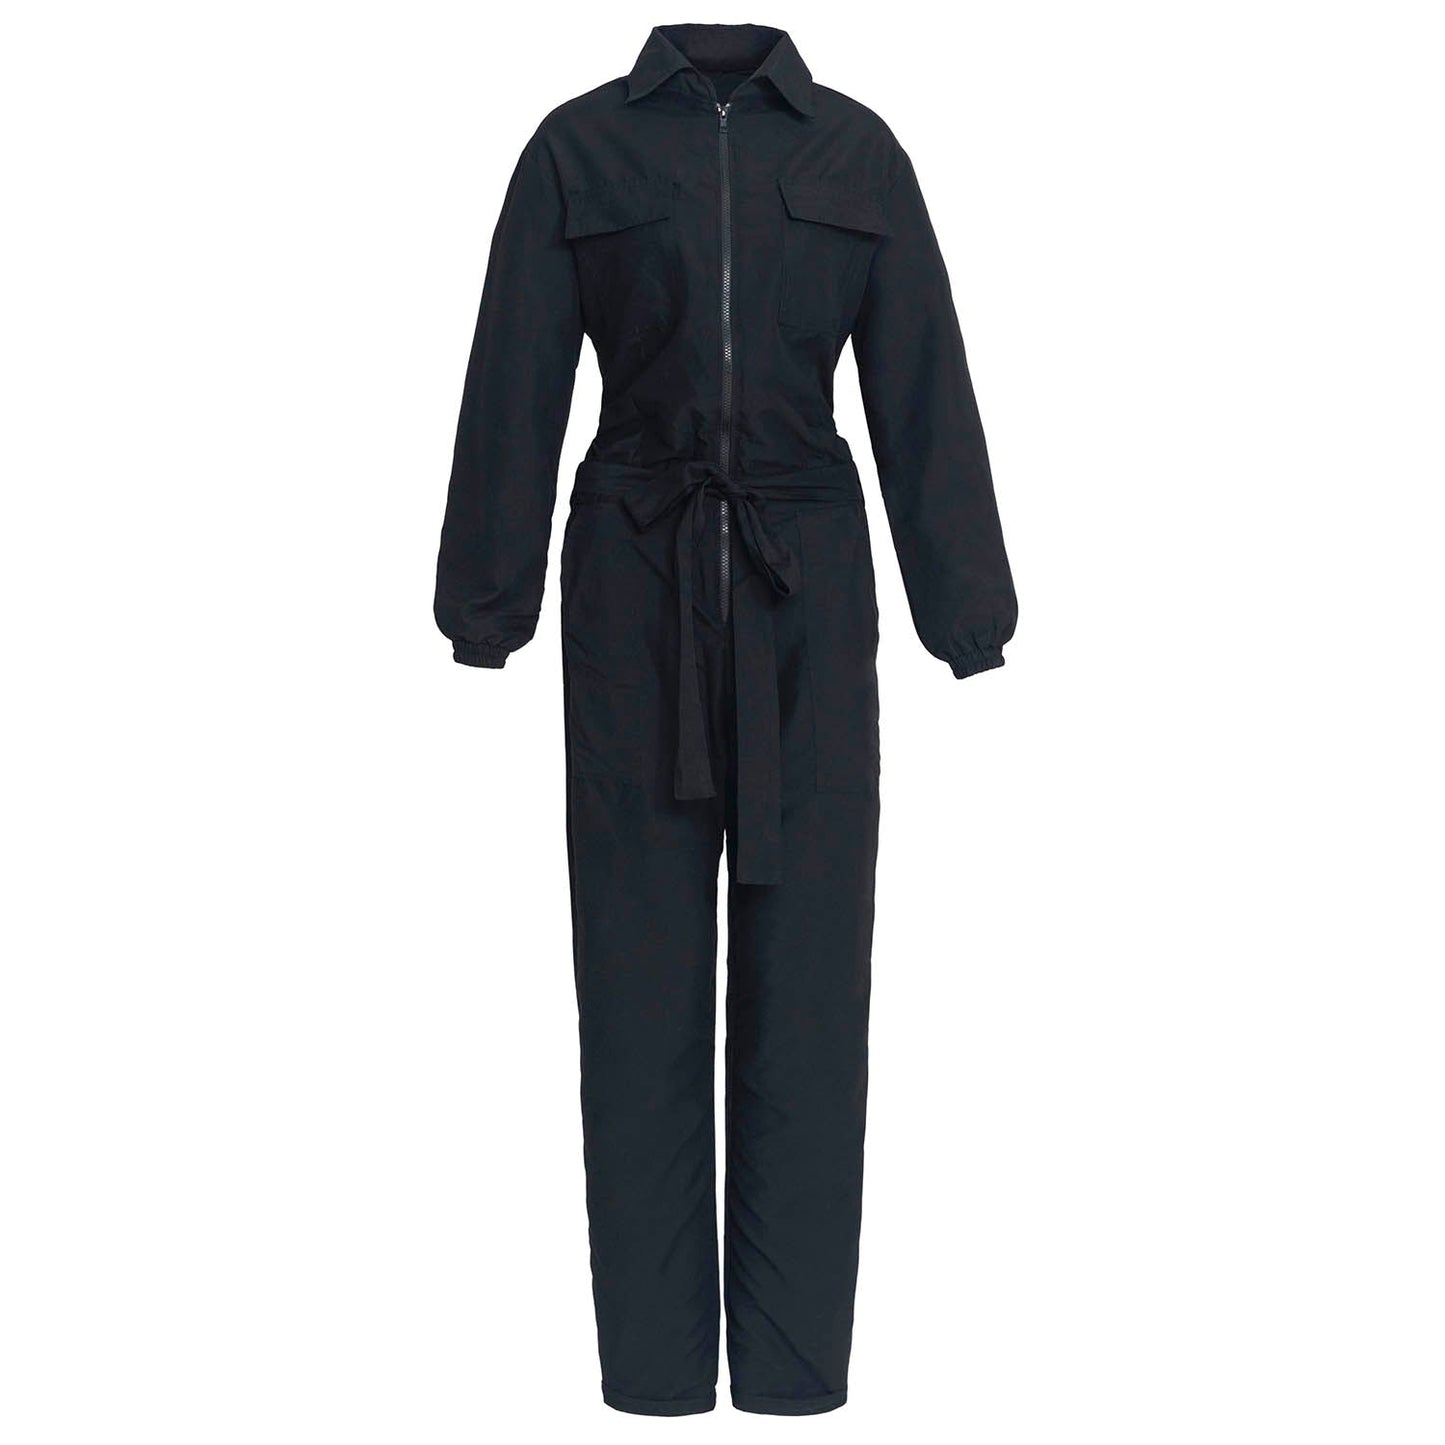 Amelia Recycled Travel Jumpsuit in Black